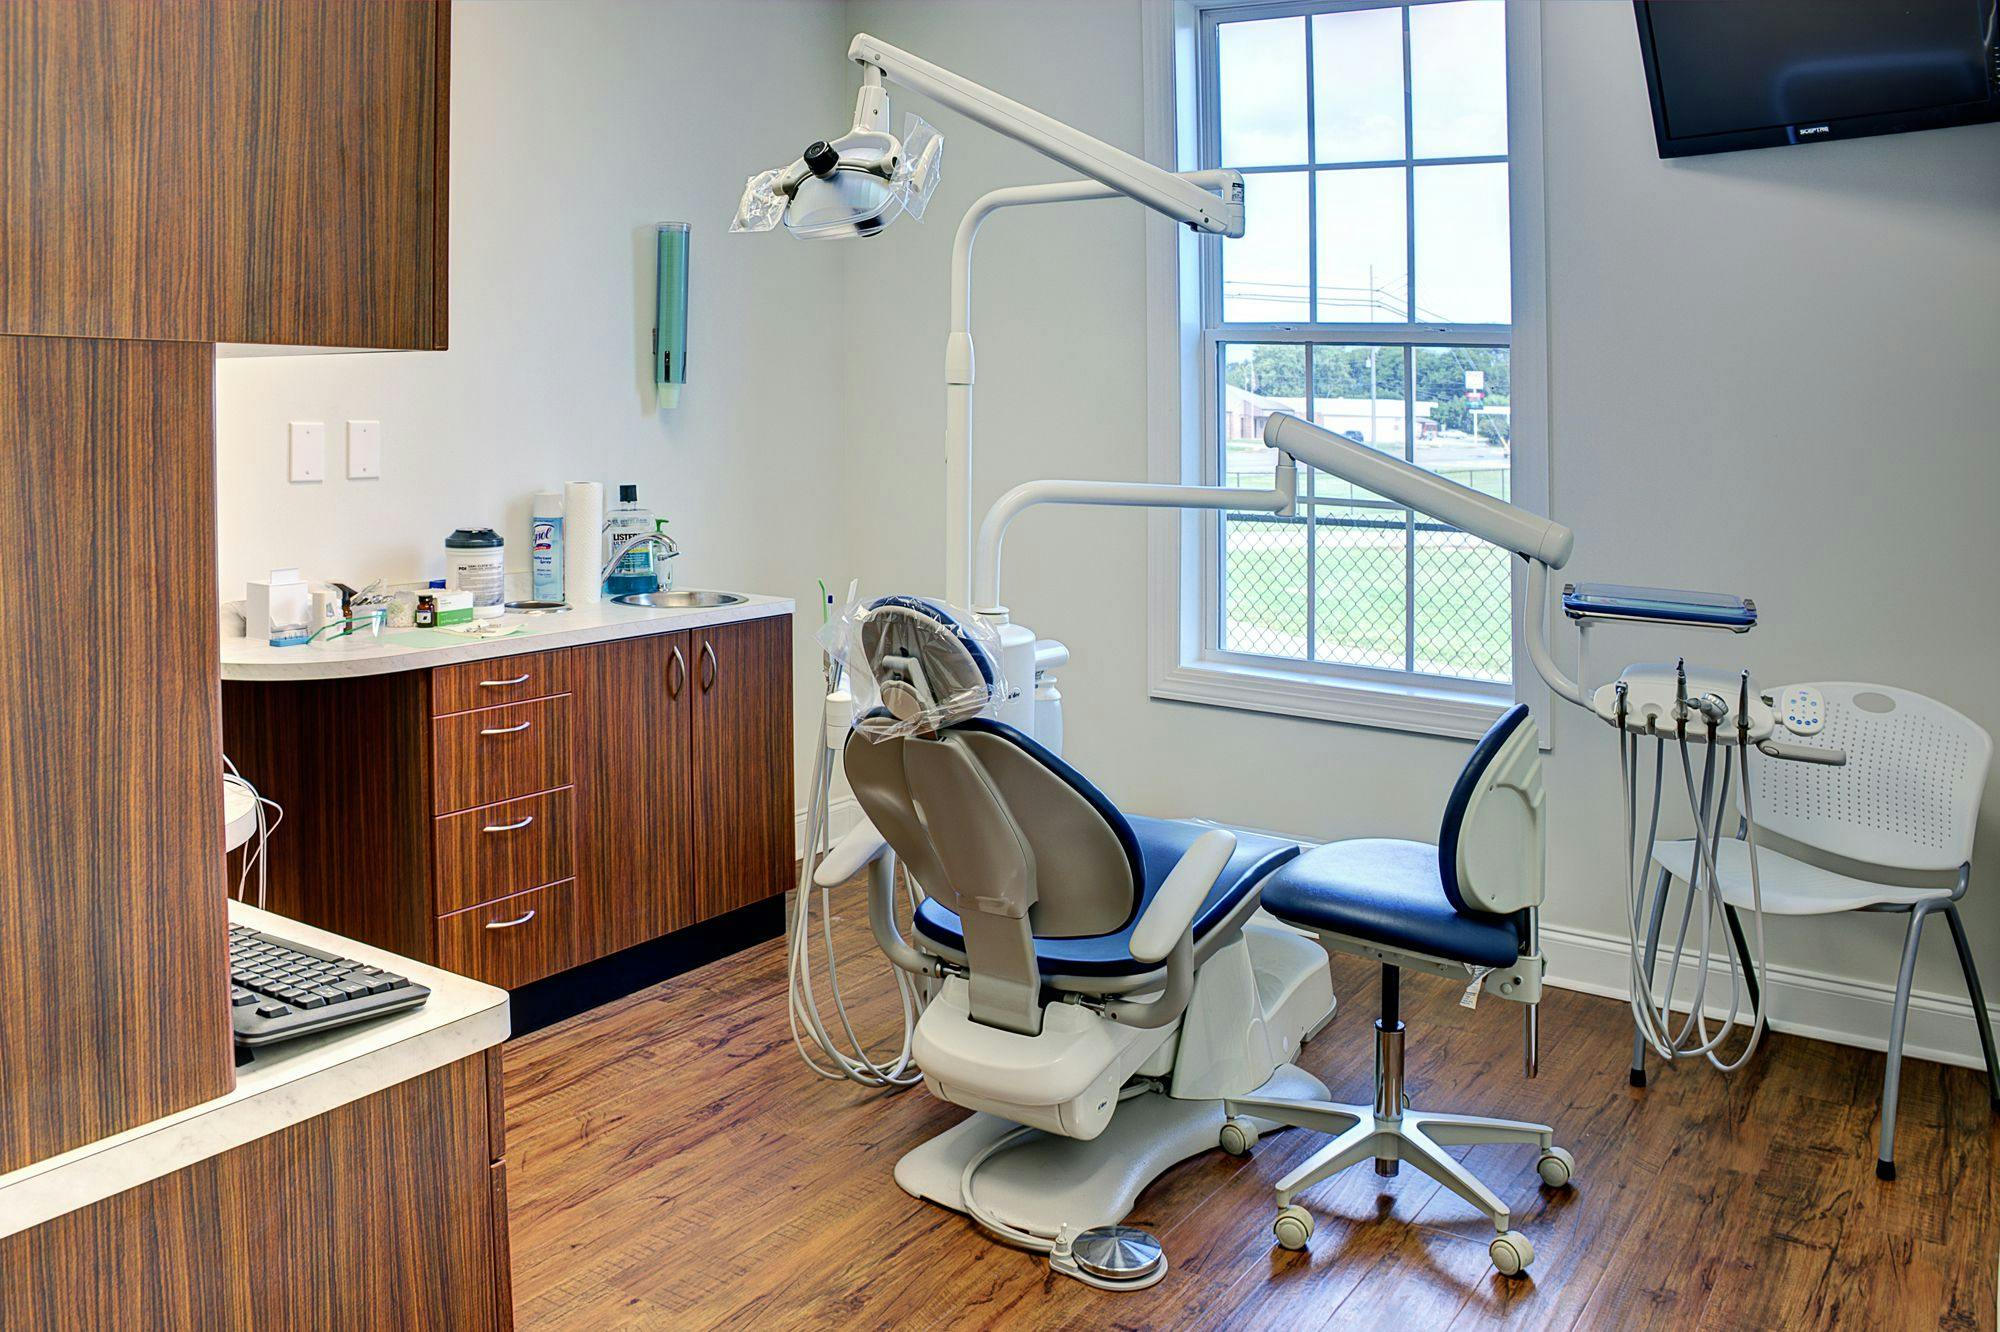 What You Need to Know About Scaling Your Dental Practice. Image courtesy of Jeff/stock.adobe.com. 